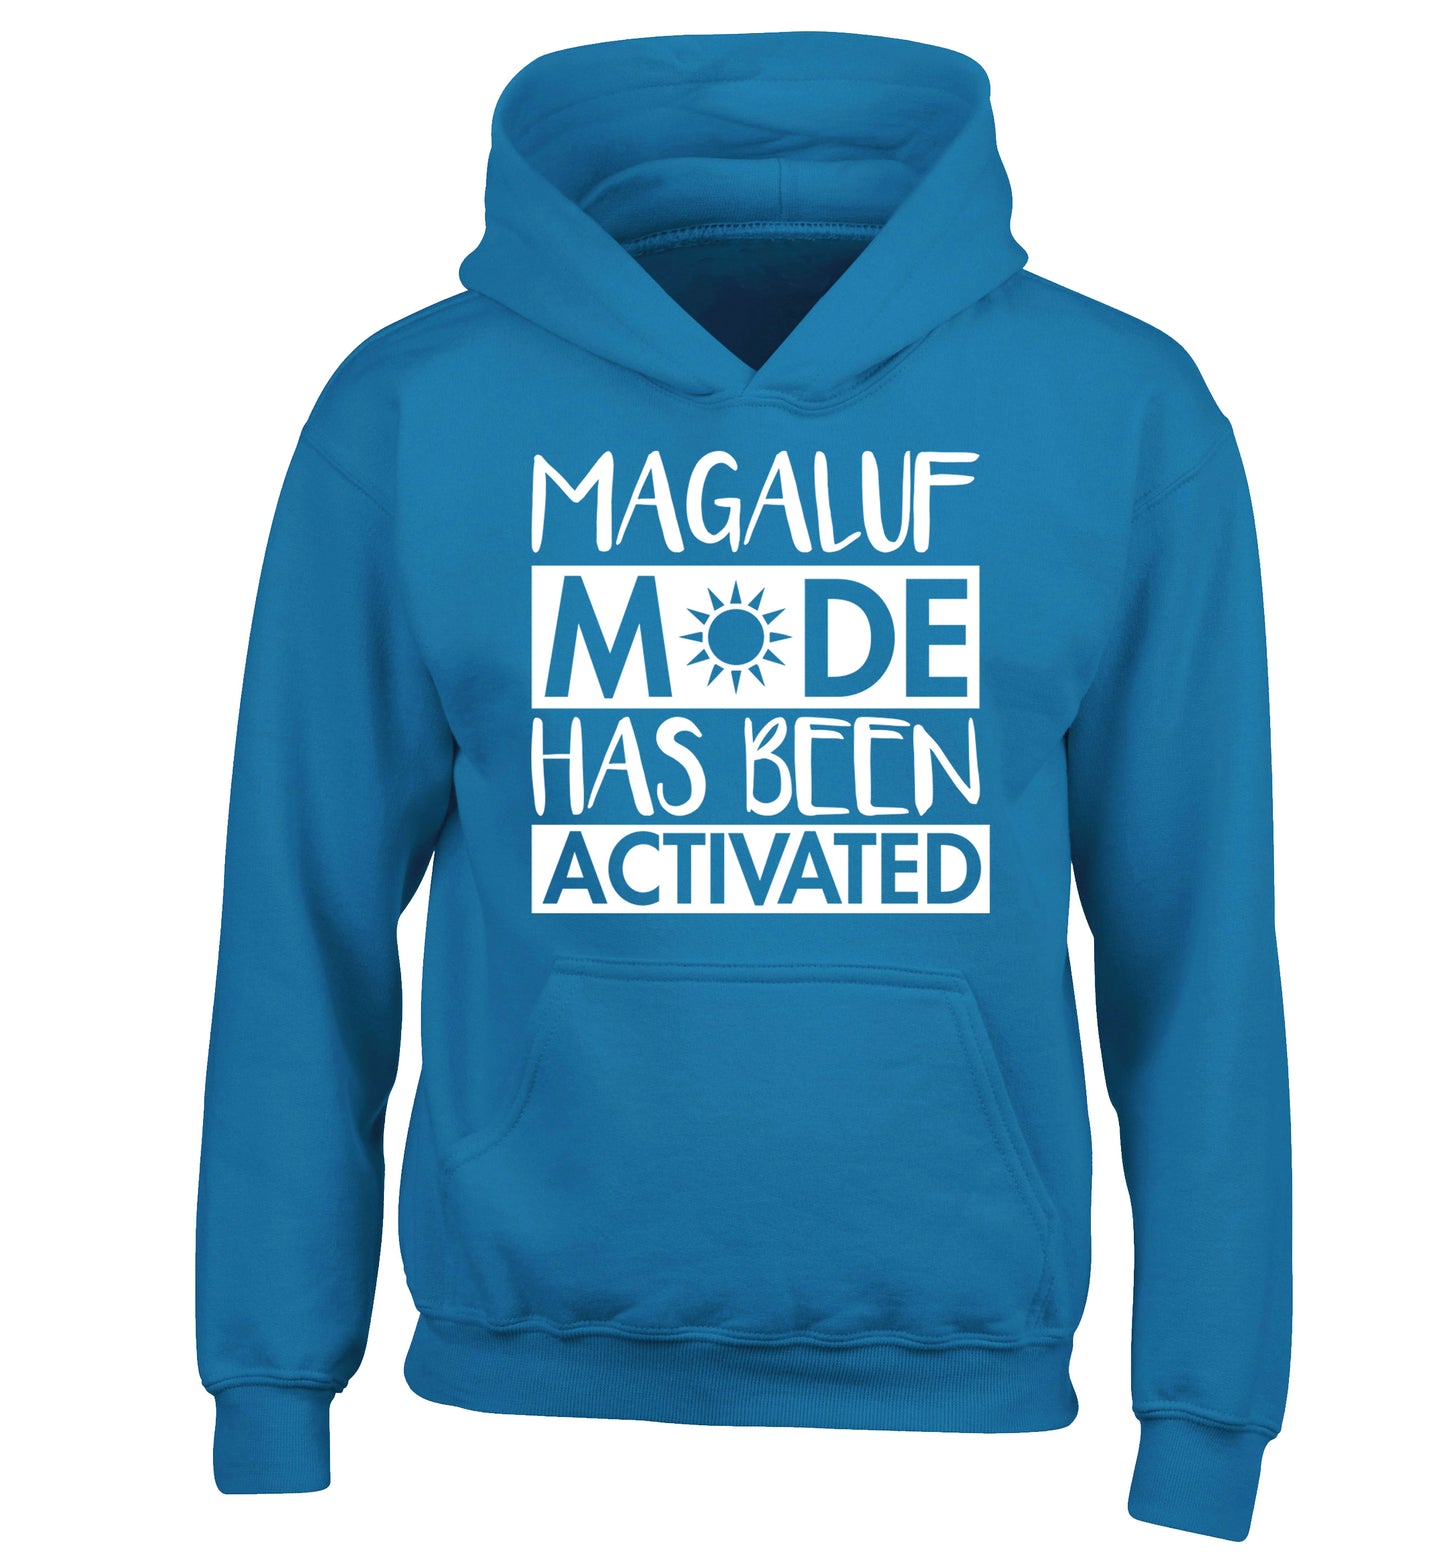 Magaluf mode has been activated children's blue hoodie 12-13 Years